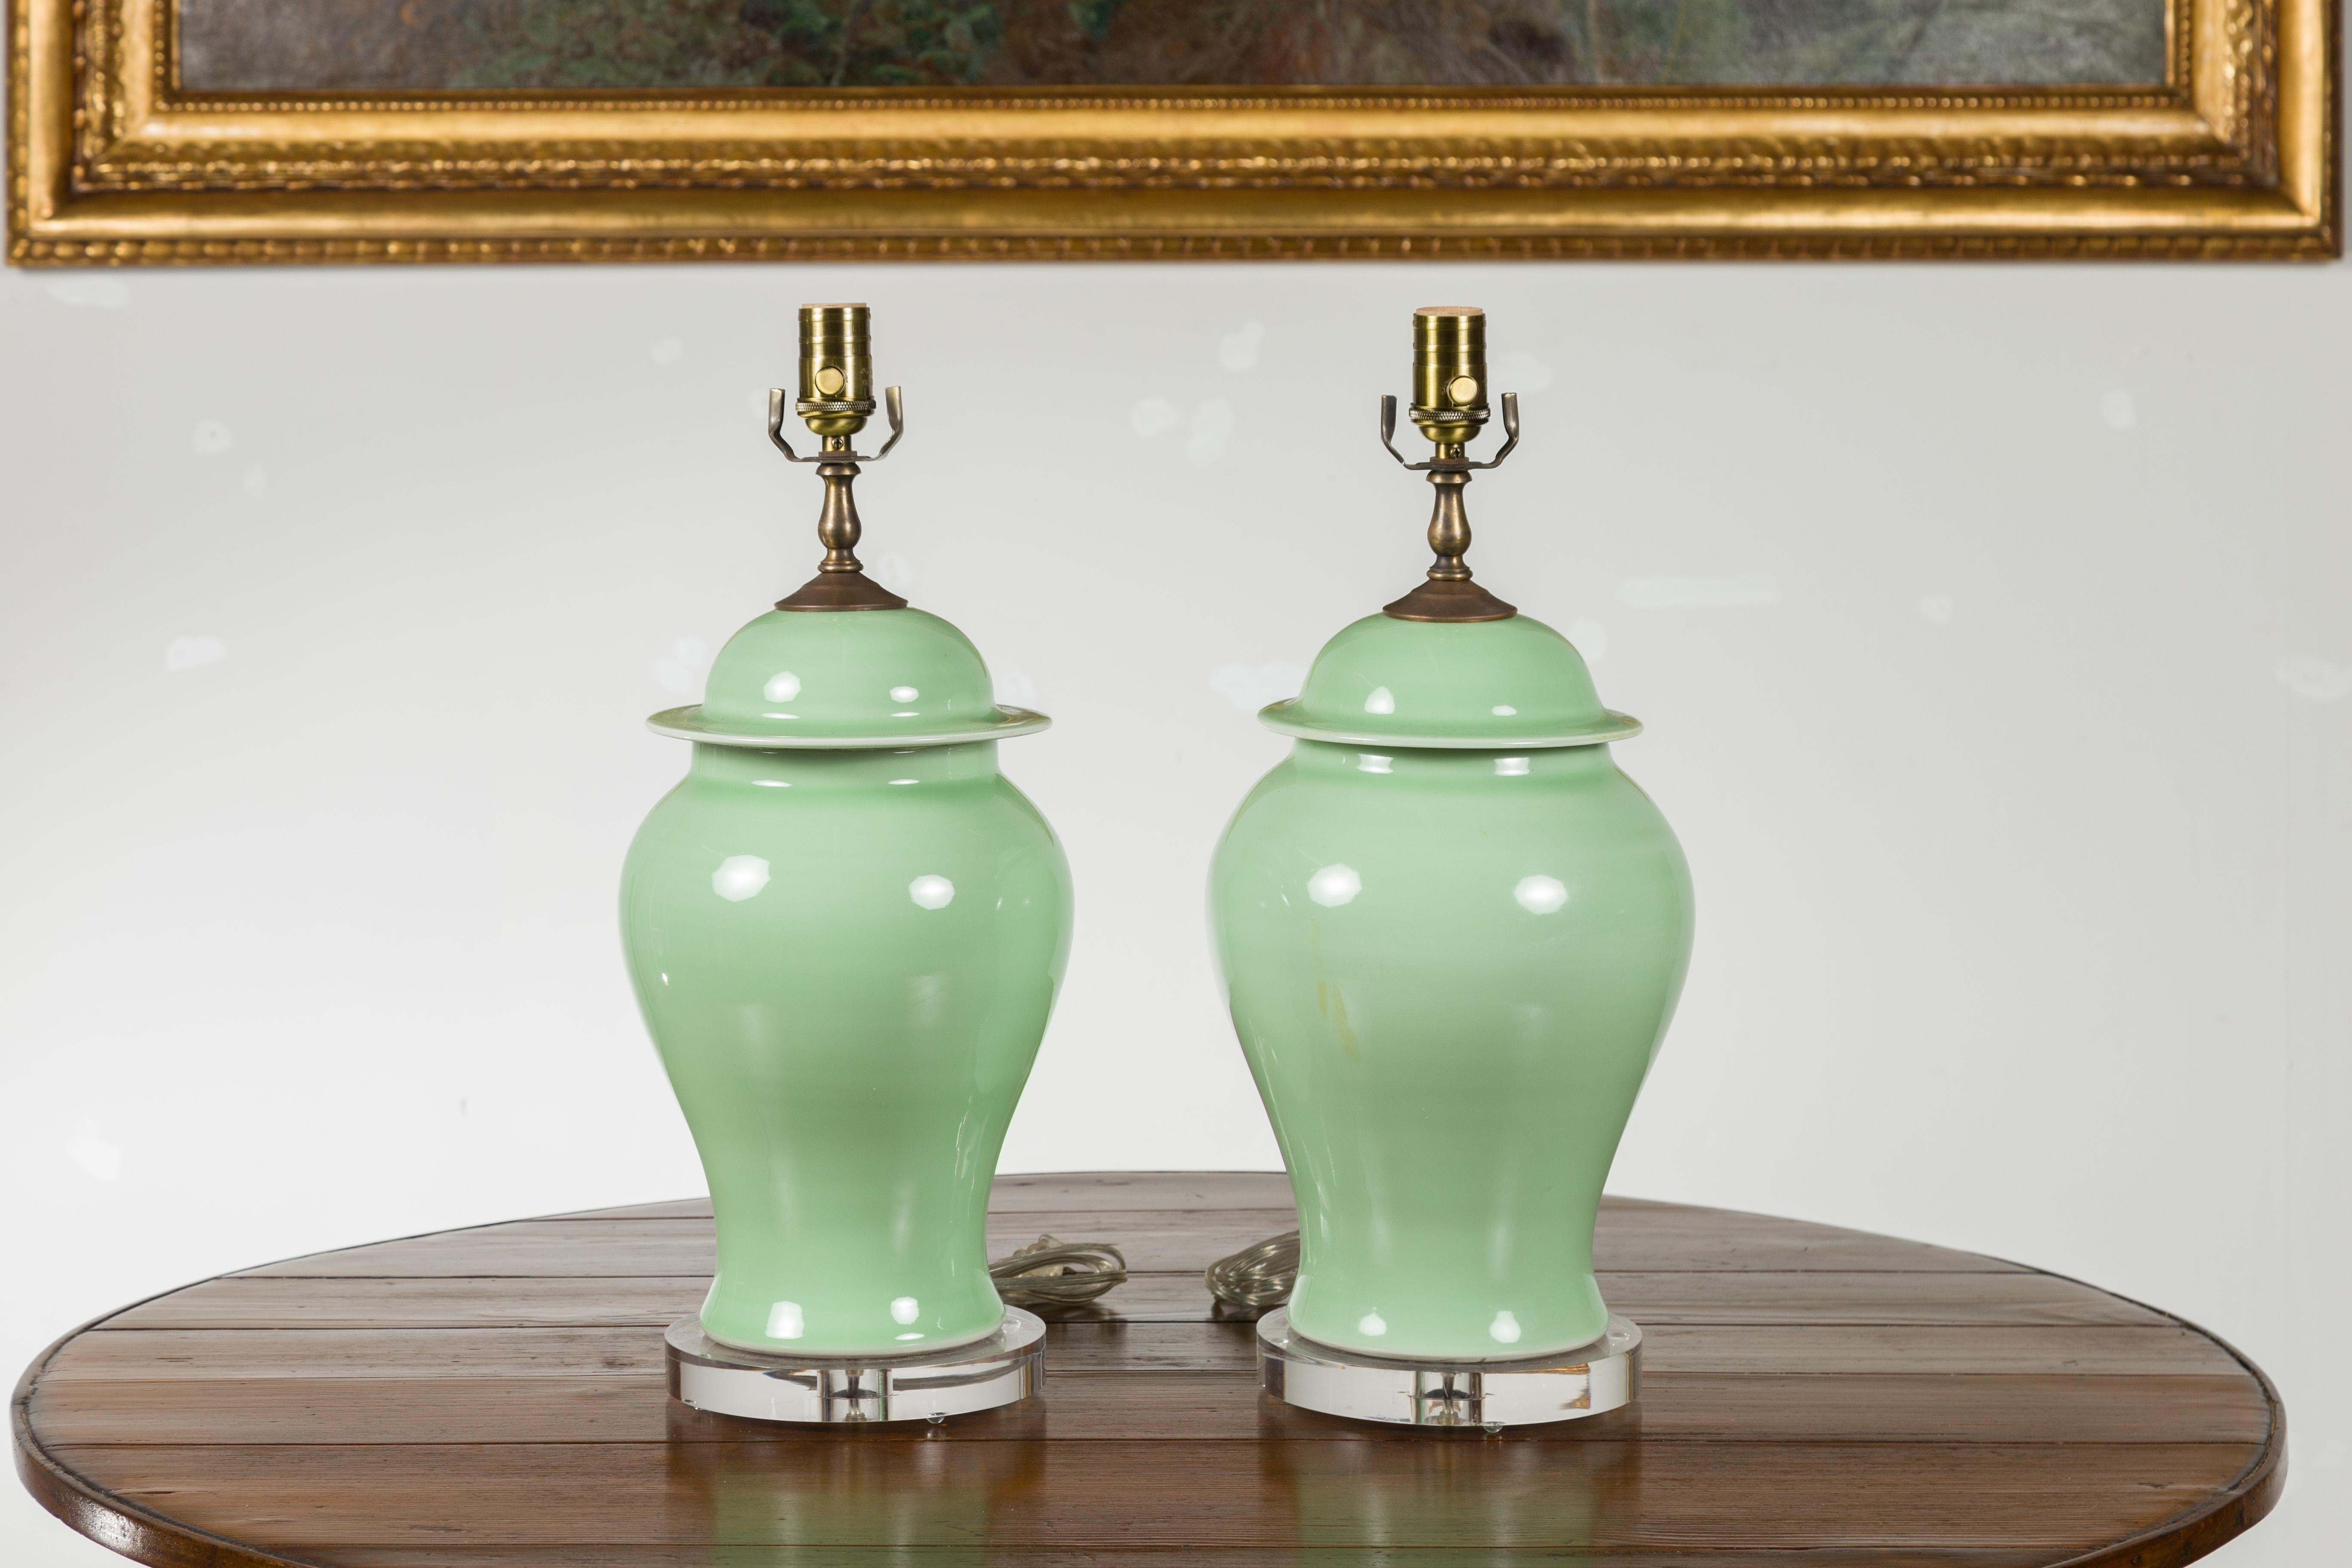 Pair of Green Porcelain Lidded Jar Table Lamps with Round Lucite Bases, Wired In Good Condition For Sale In Atlanta, GA